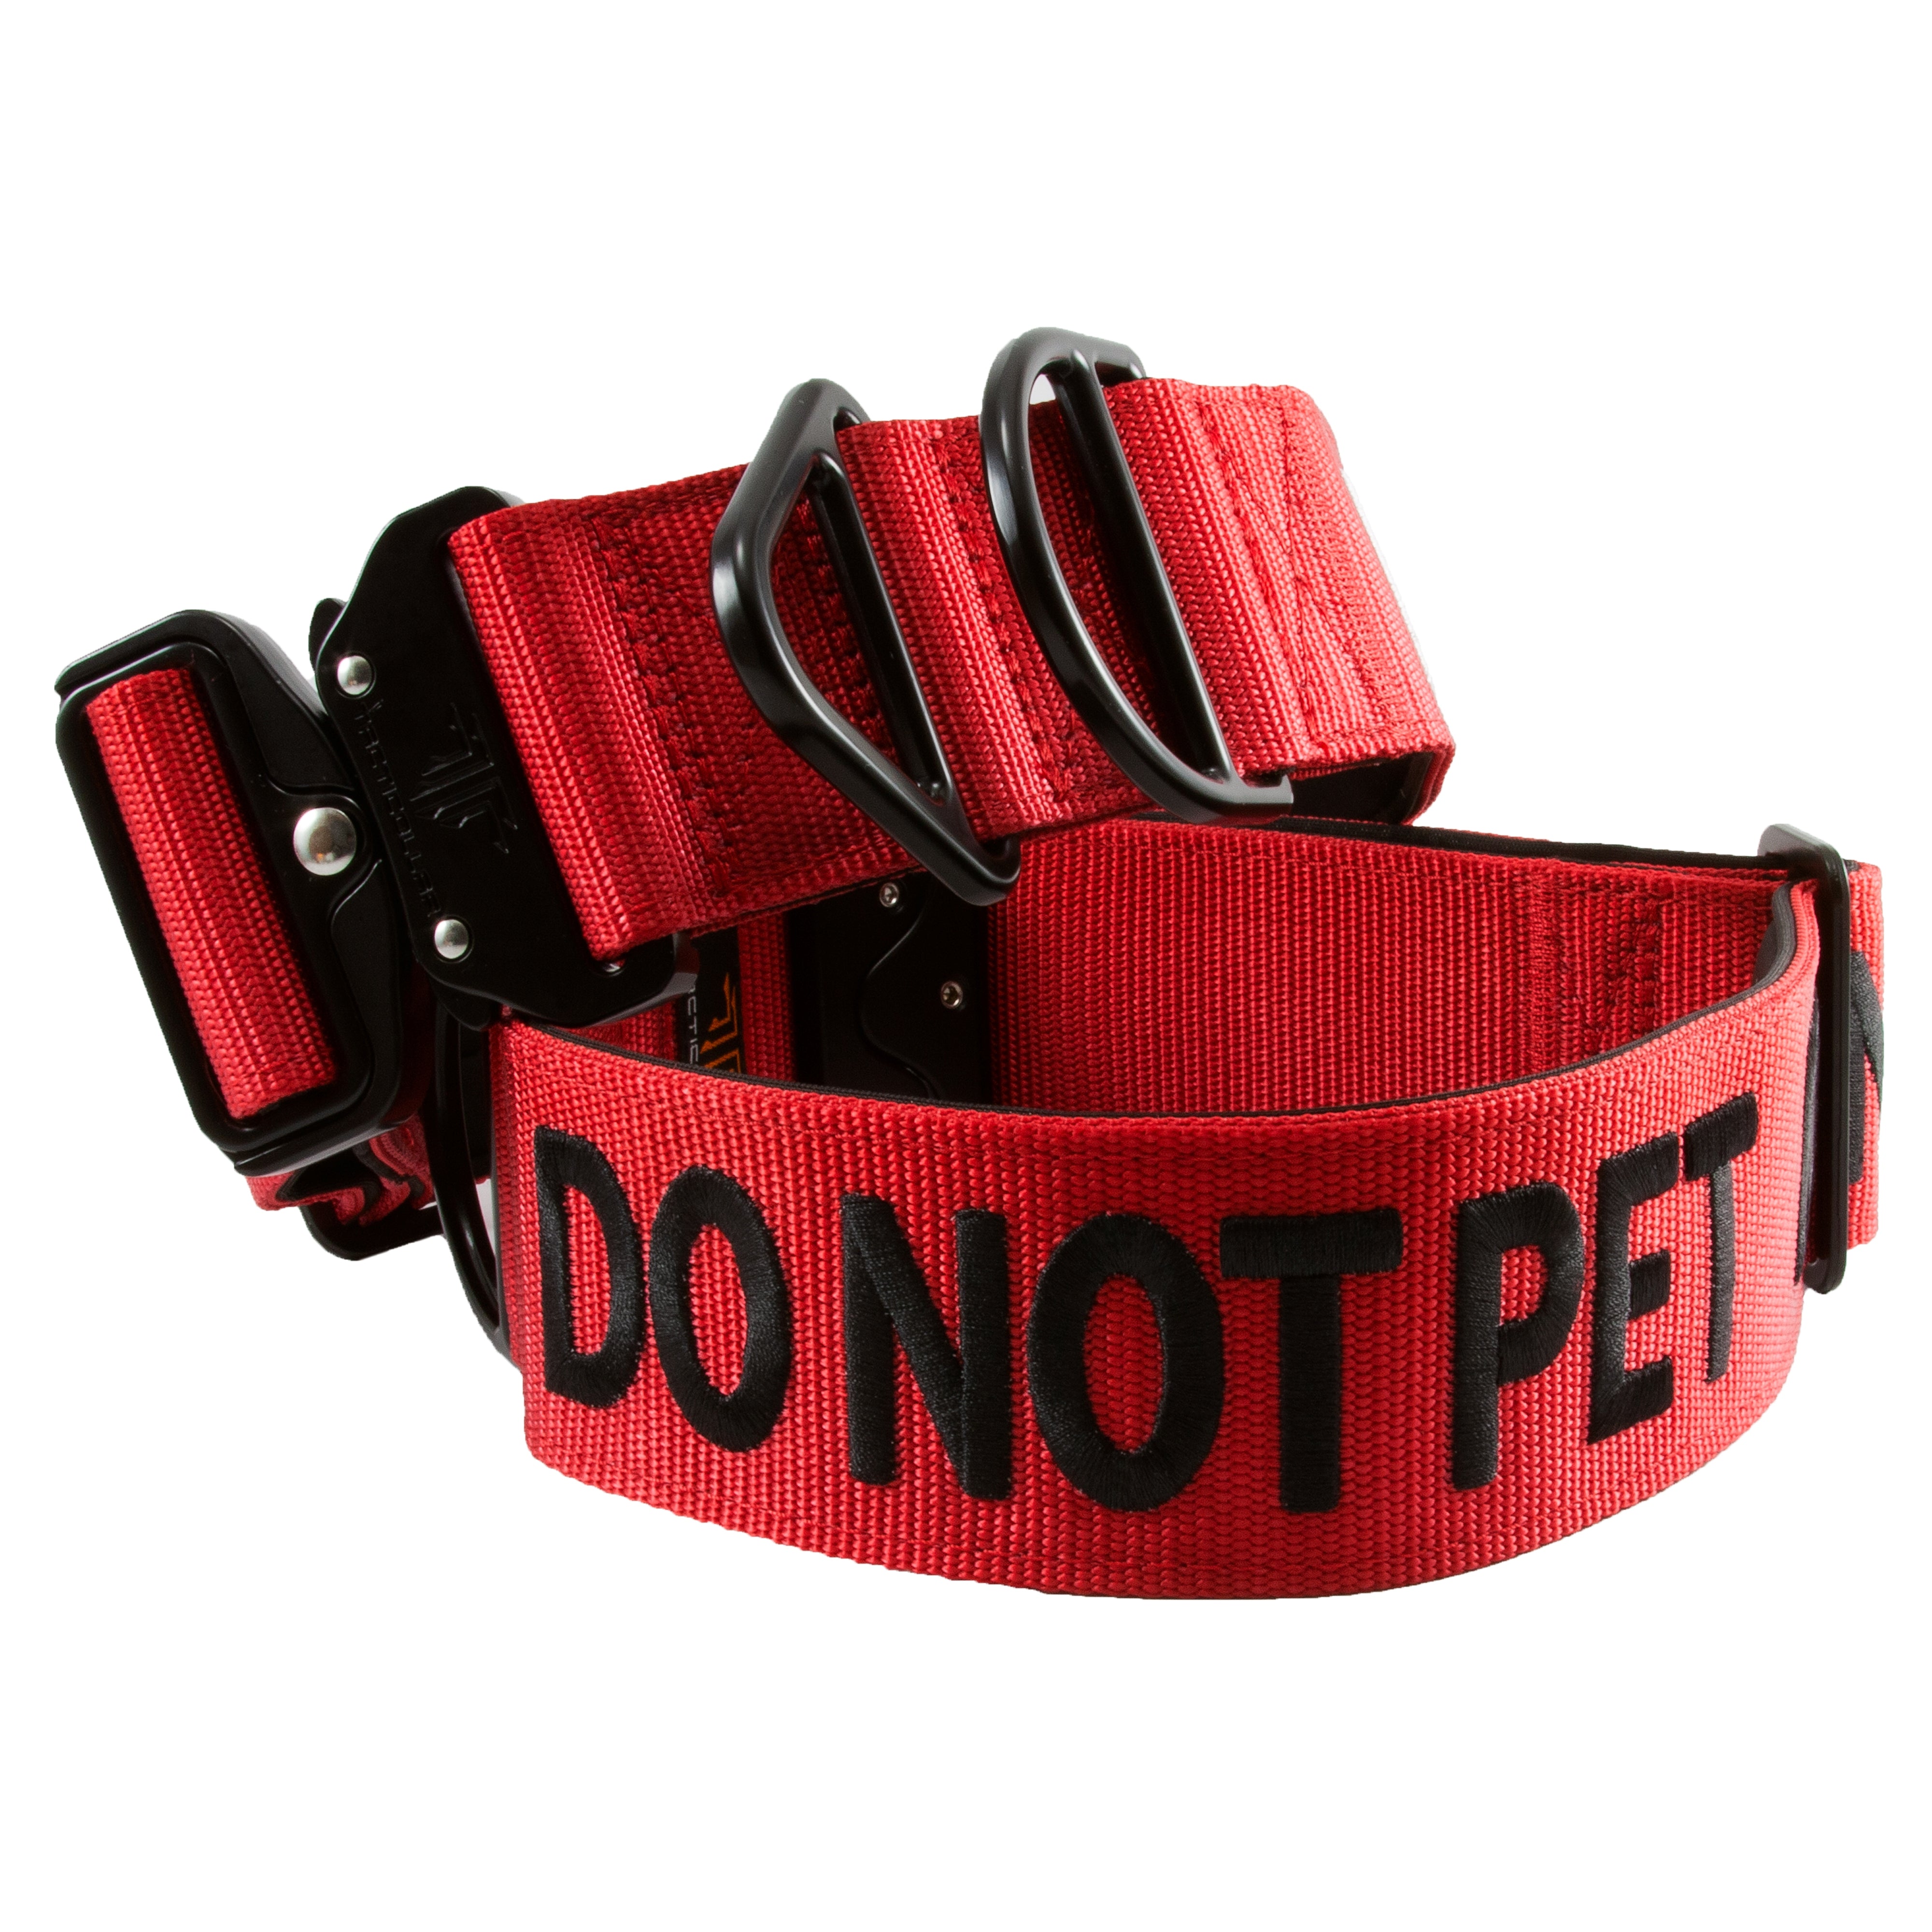 DO NOT PET, 1.5 inch and 2 inch Nylon Collar for Small, Medium and Large Dogs, Neoprene Padded Inside, Communicate Your Dogs Needs to Prevent Accidents